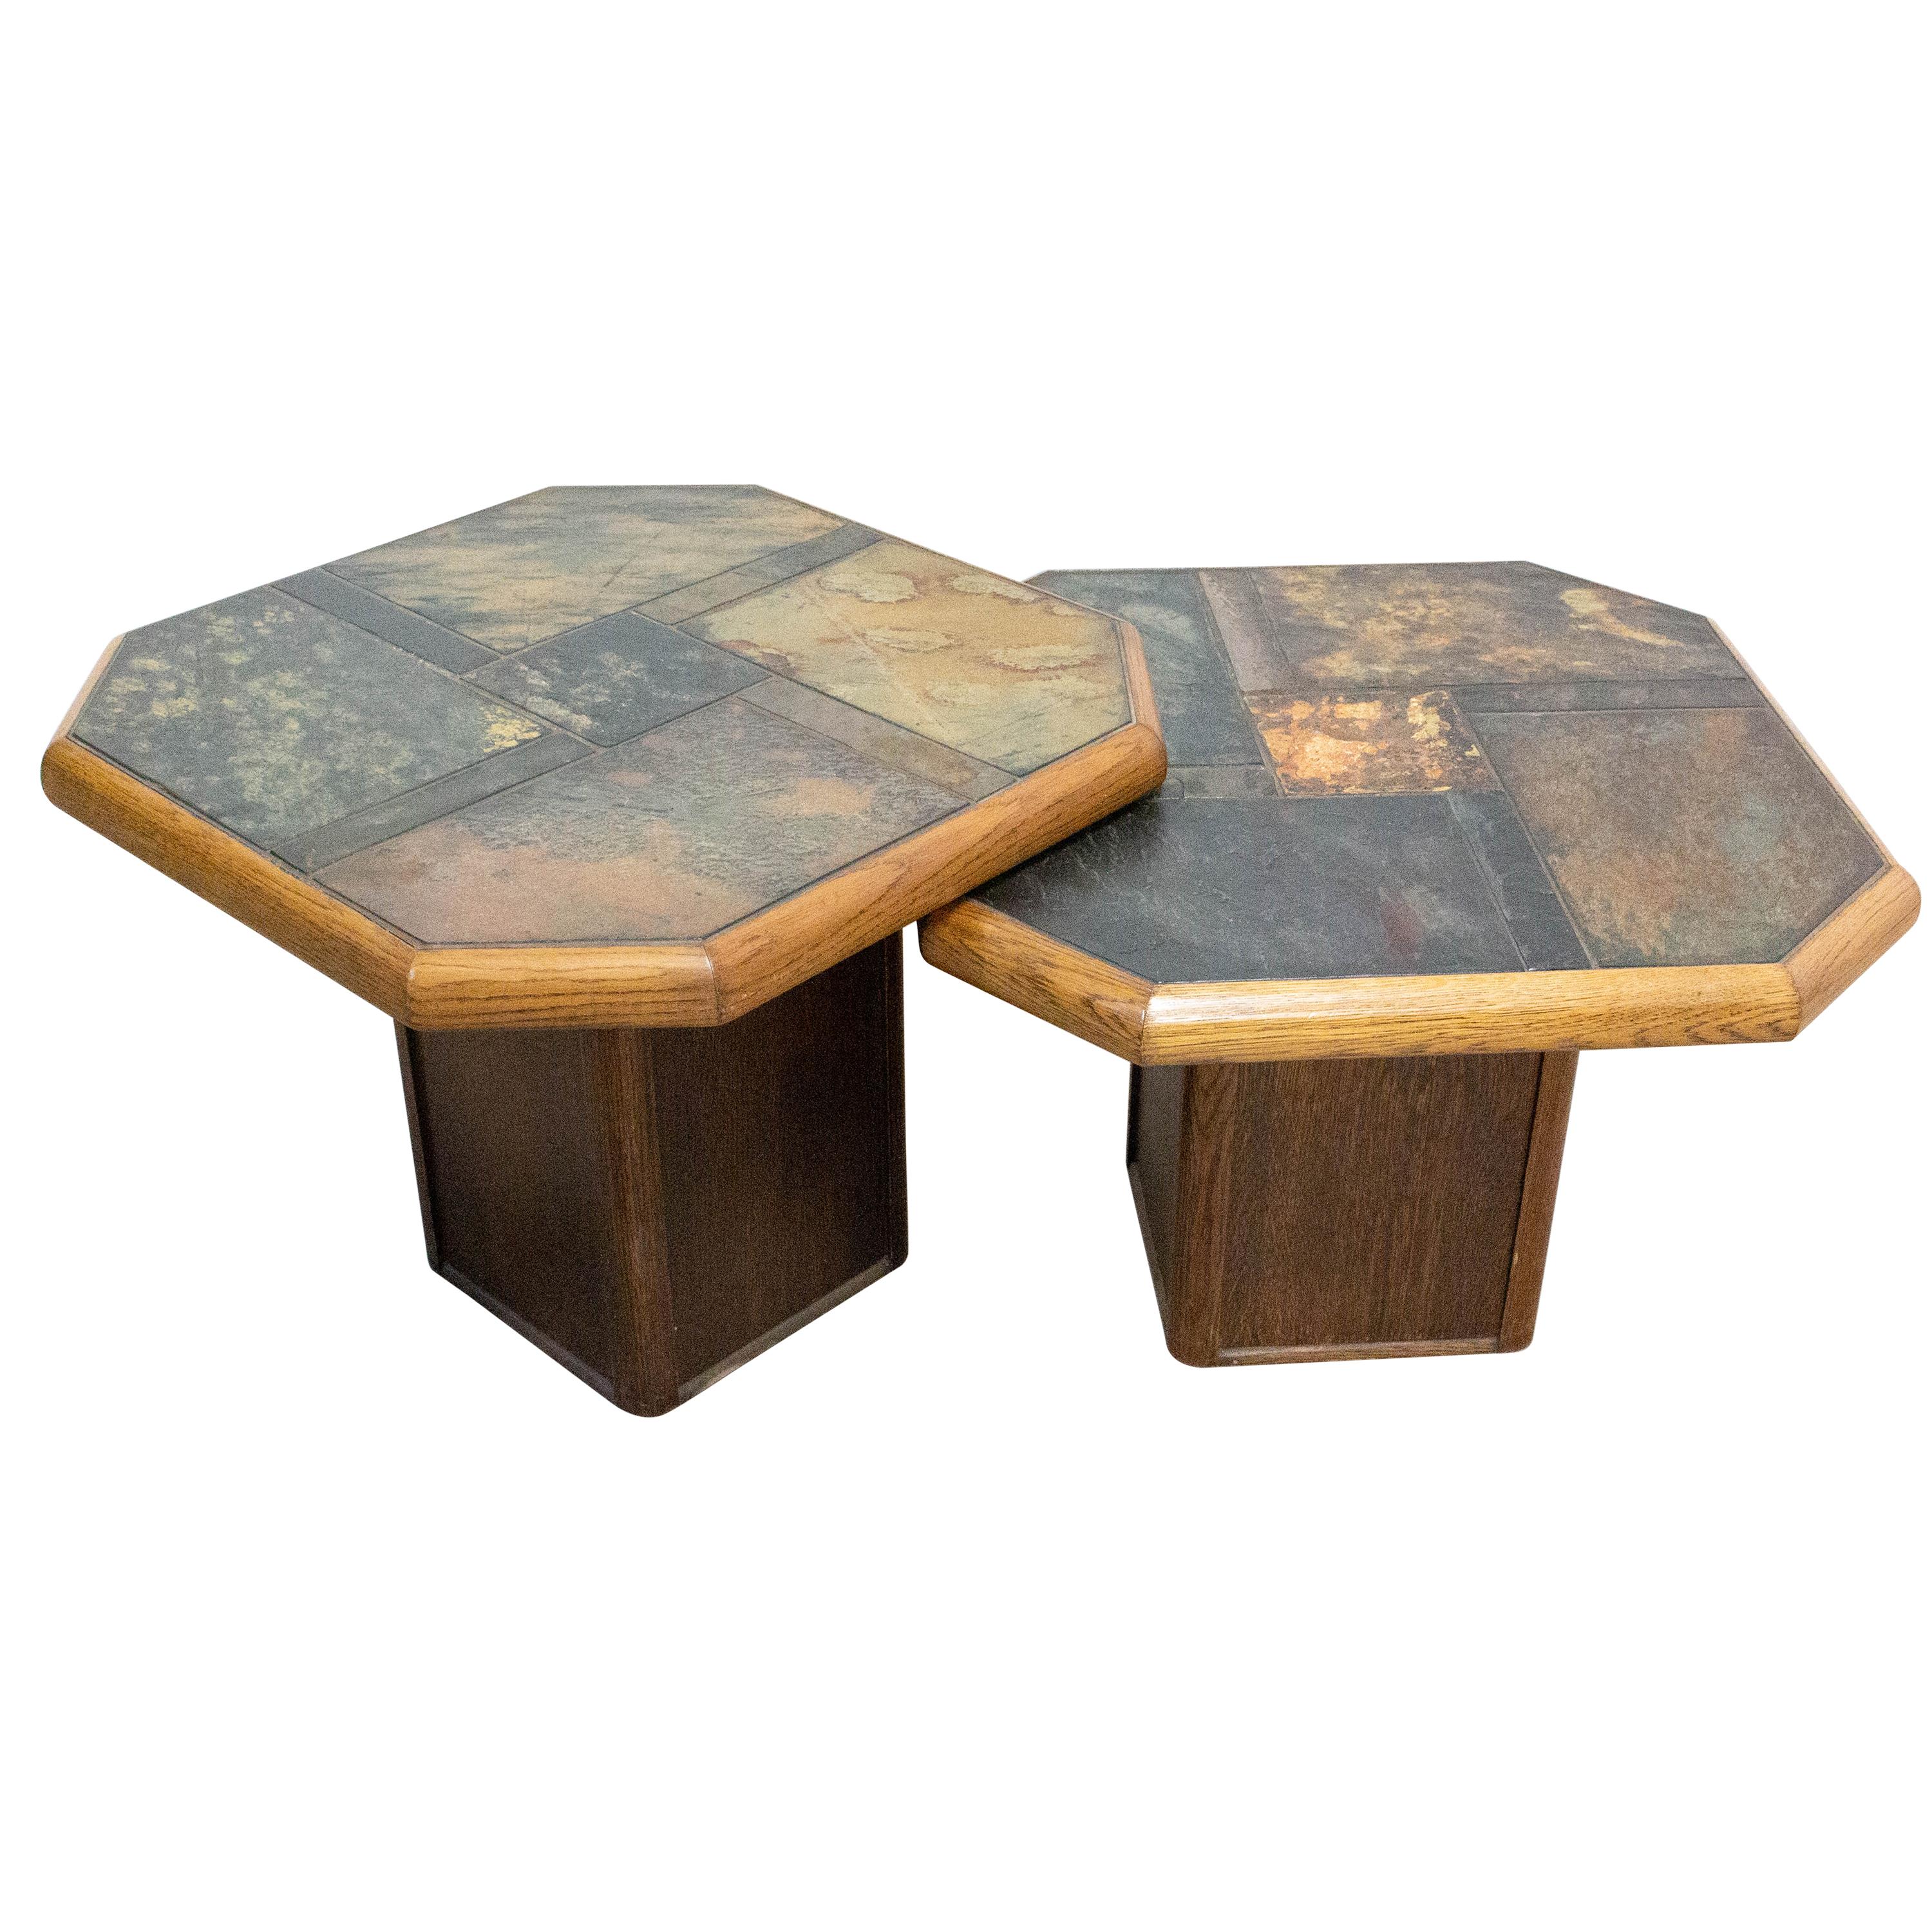 Pair of Gigogne Coffee Table Wood and Slate Stone Top, French, circa 1980